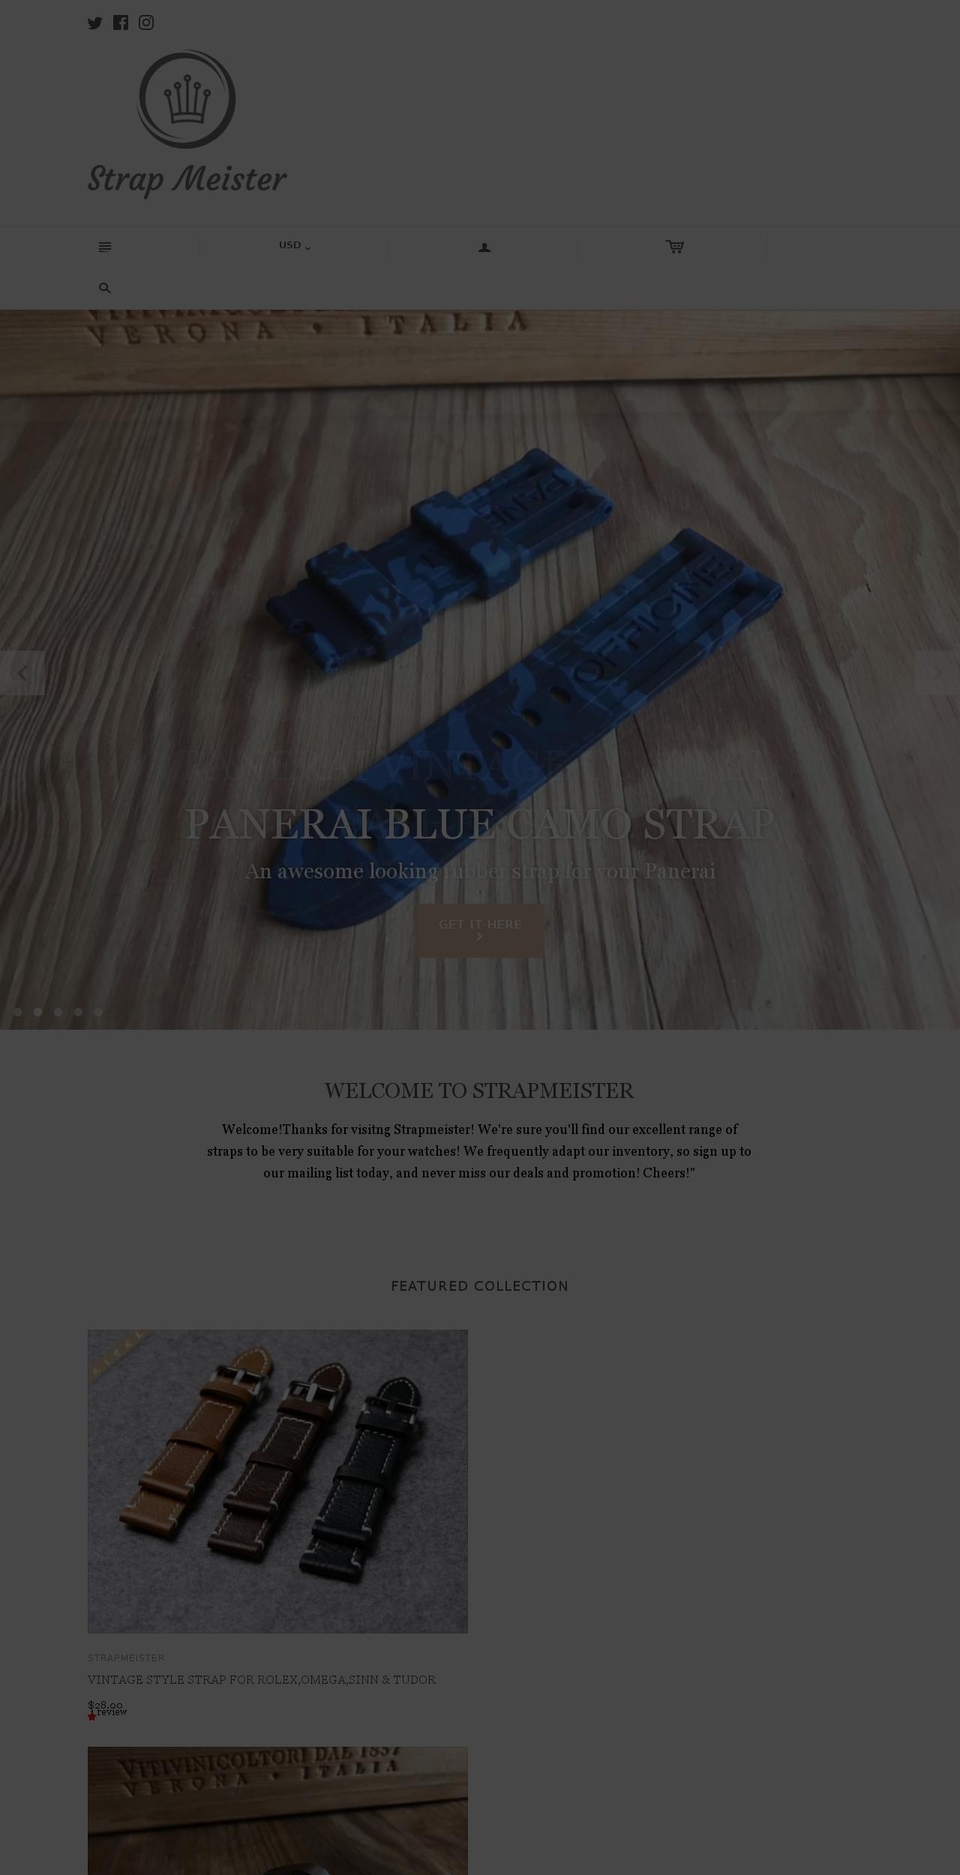 Atlantic Shopify theme site example strapmeister.watch